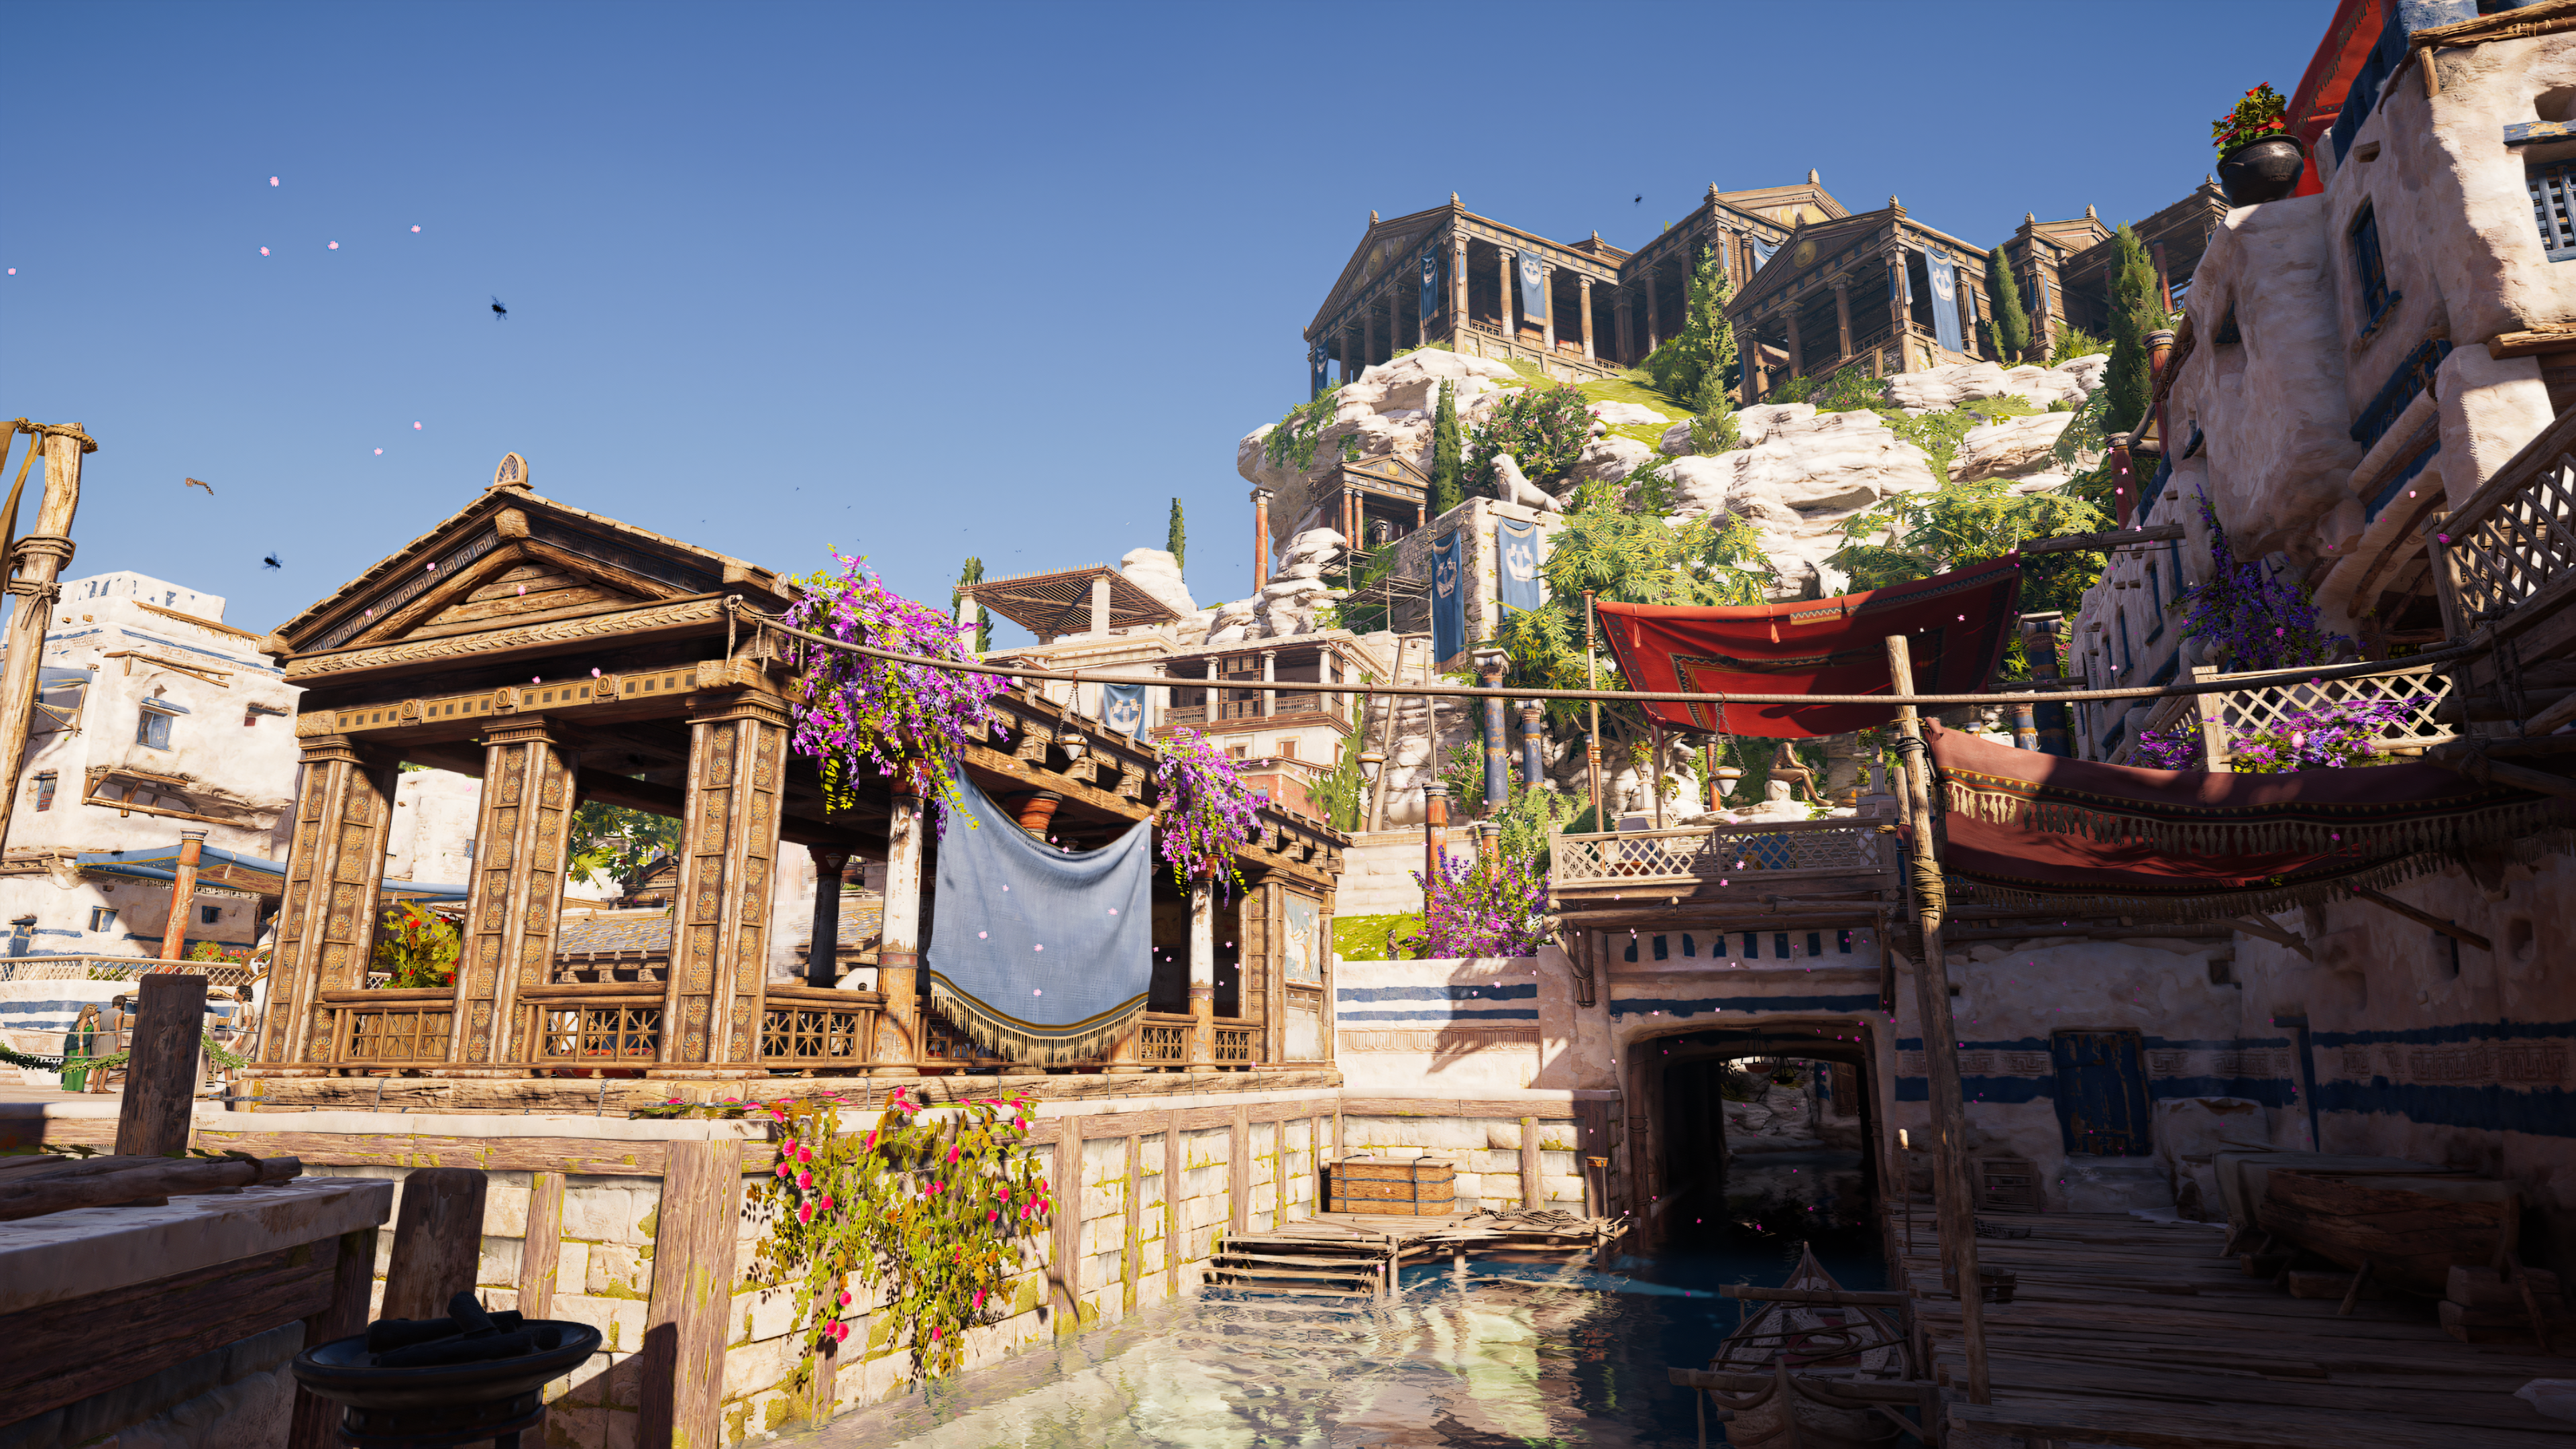 General 3840x2160 Assassins Creed: Odyssey Greece mykonos island colorful flowers Greek Columns ancient video game art video games building